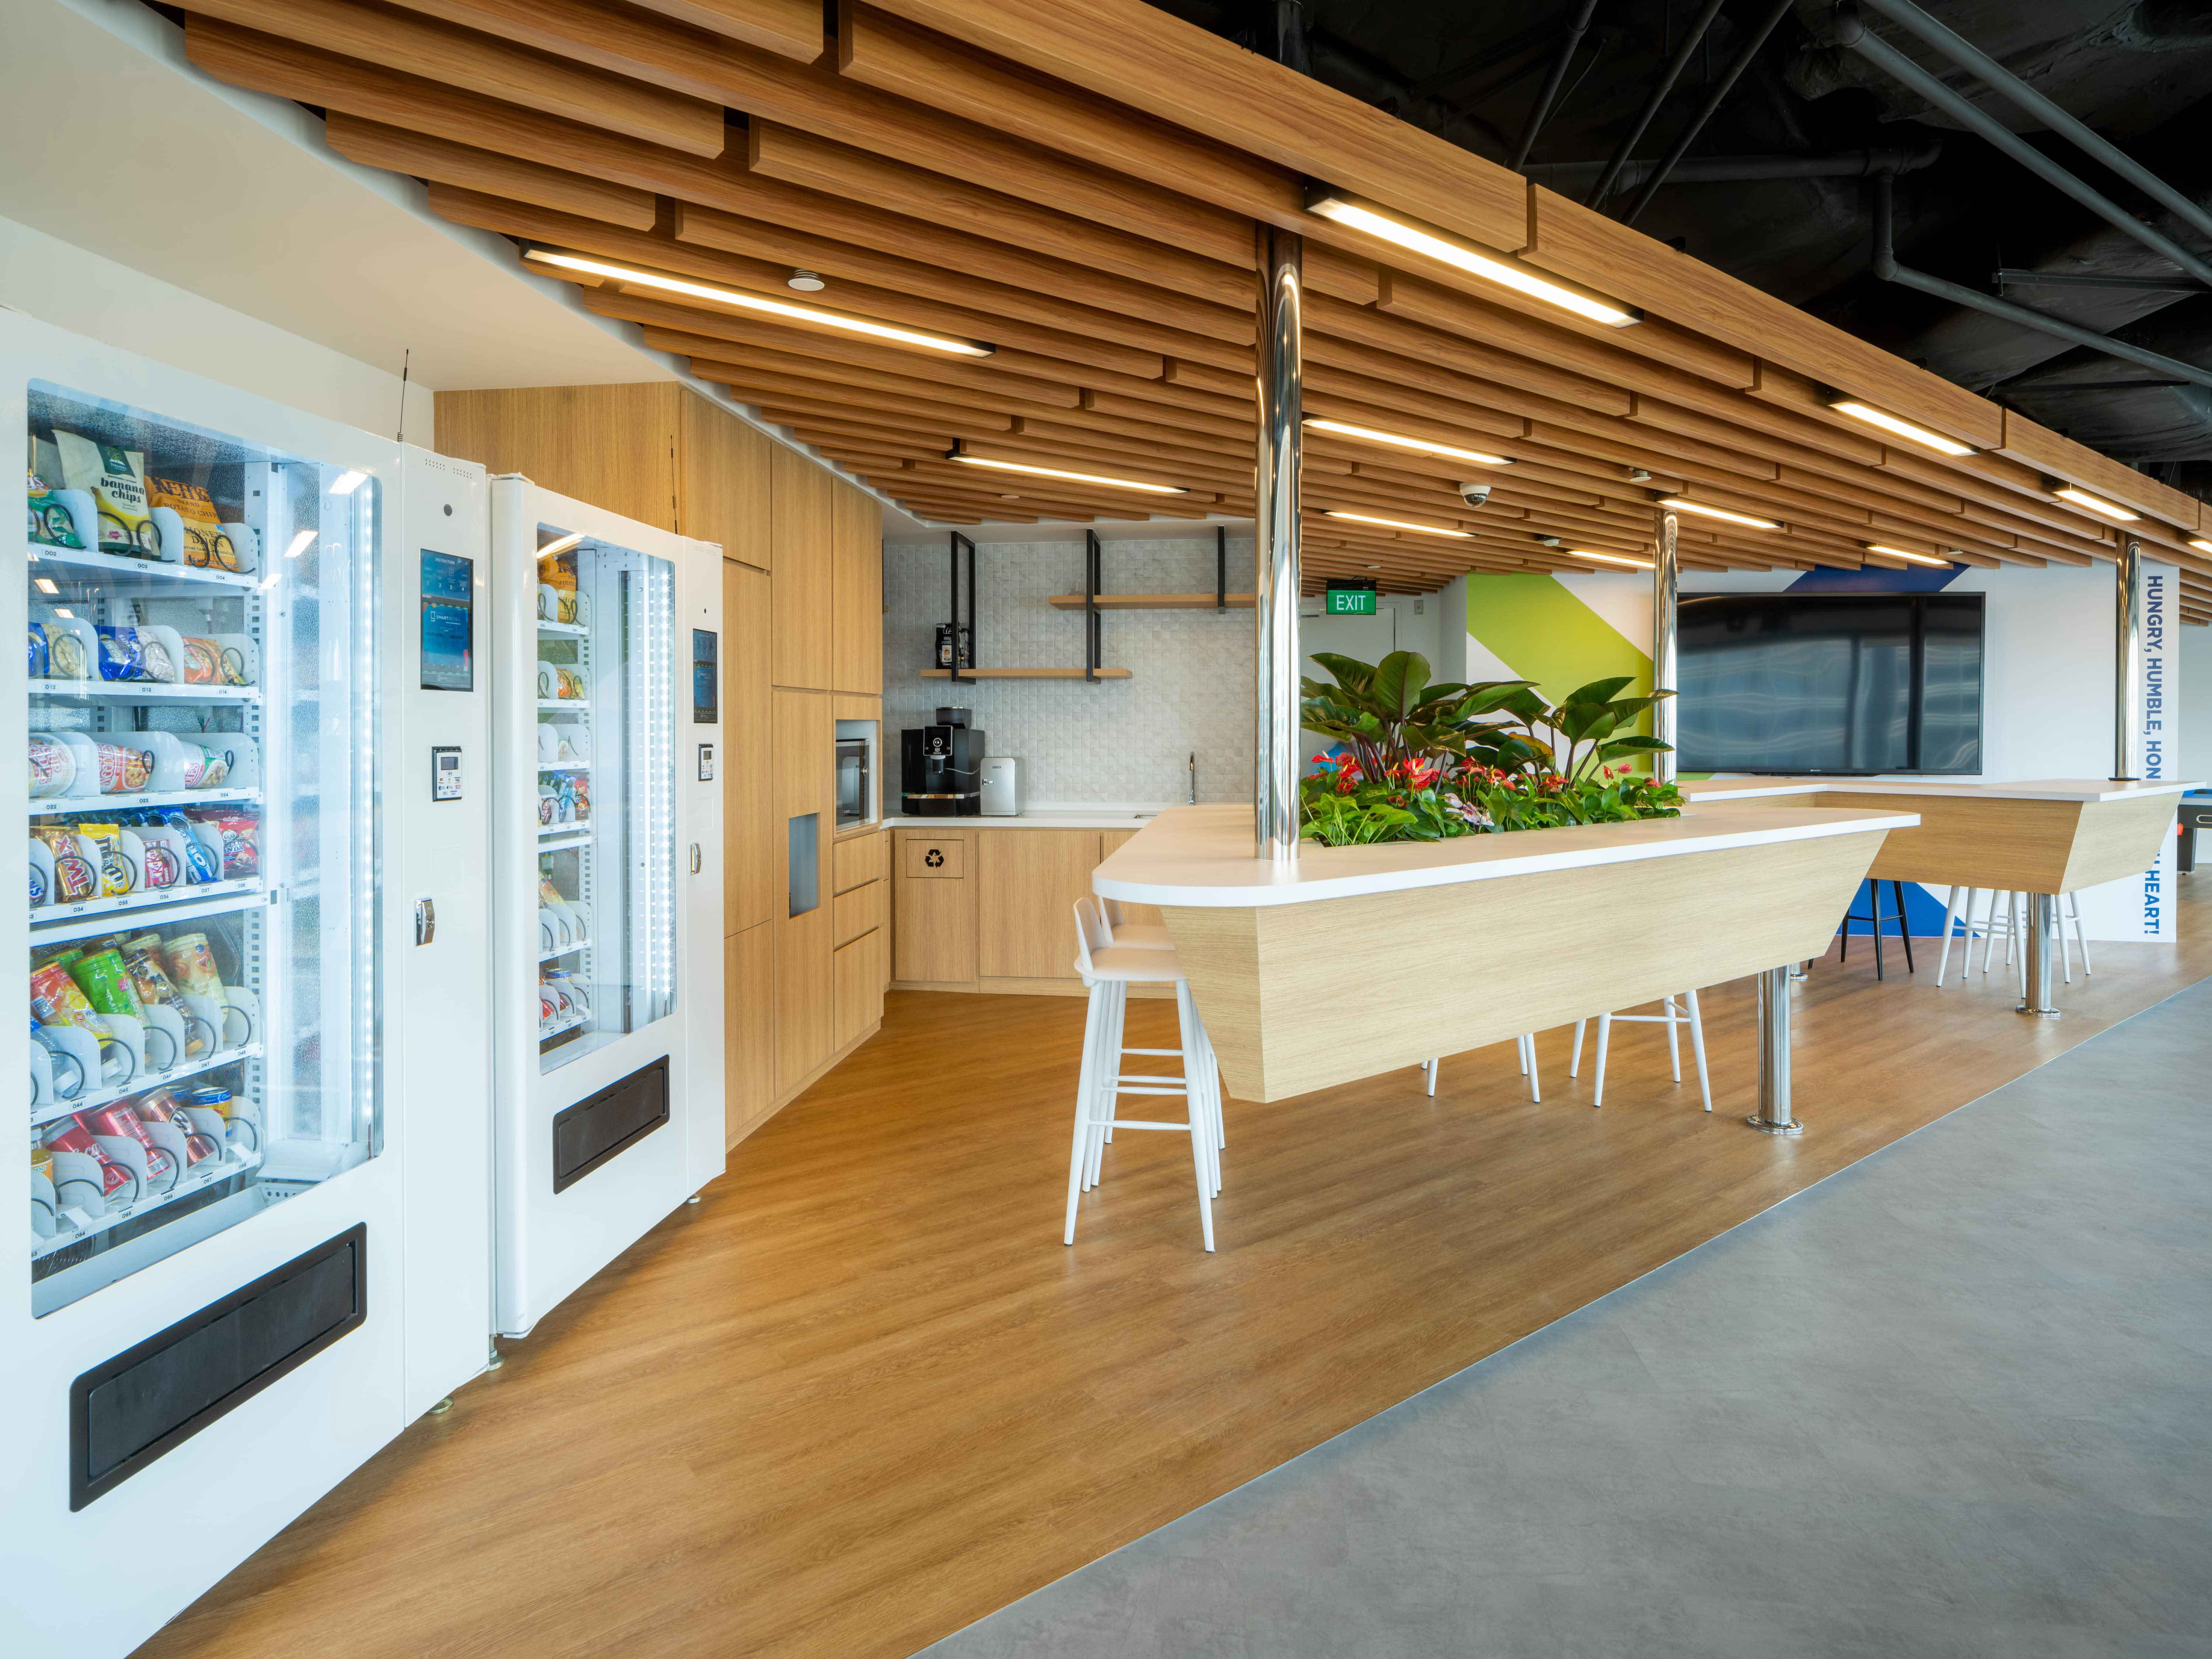  Sustainable workplace design